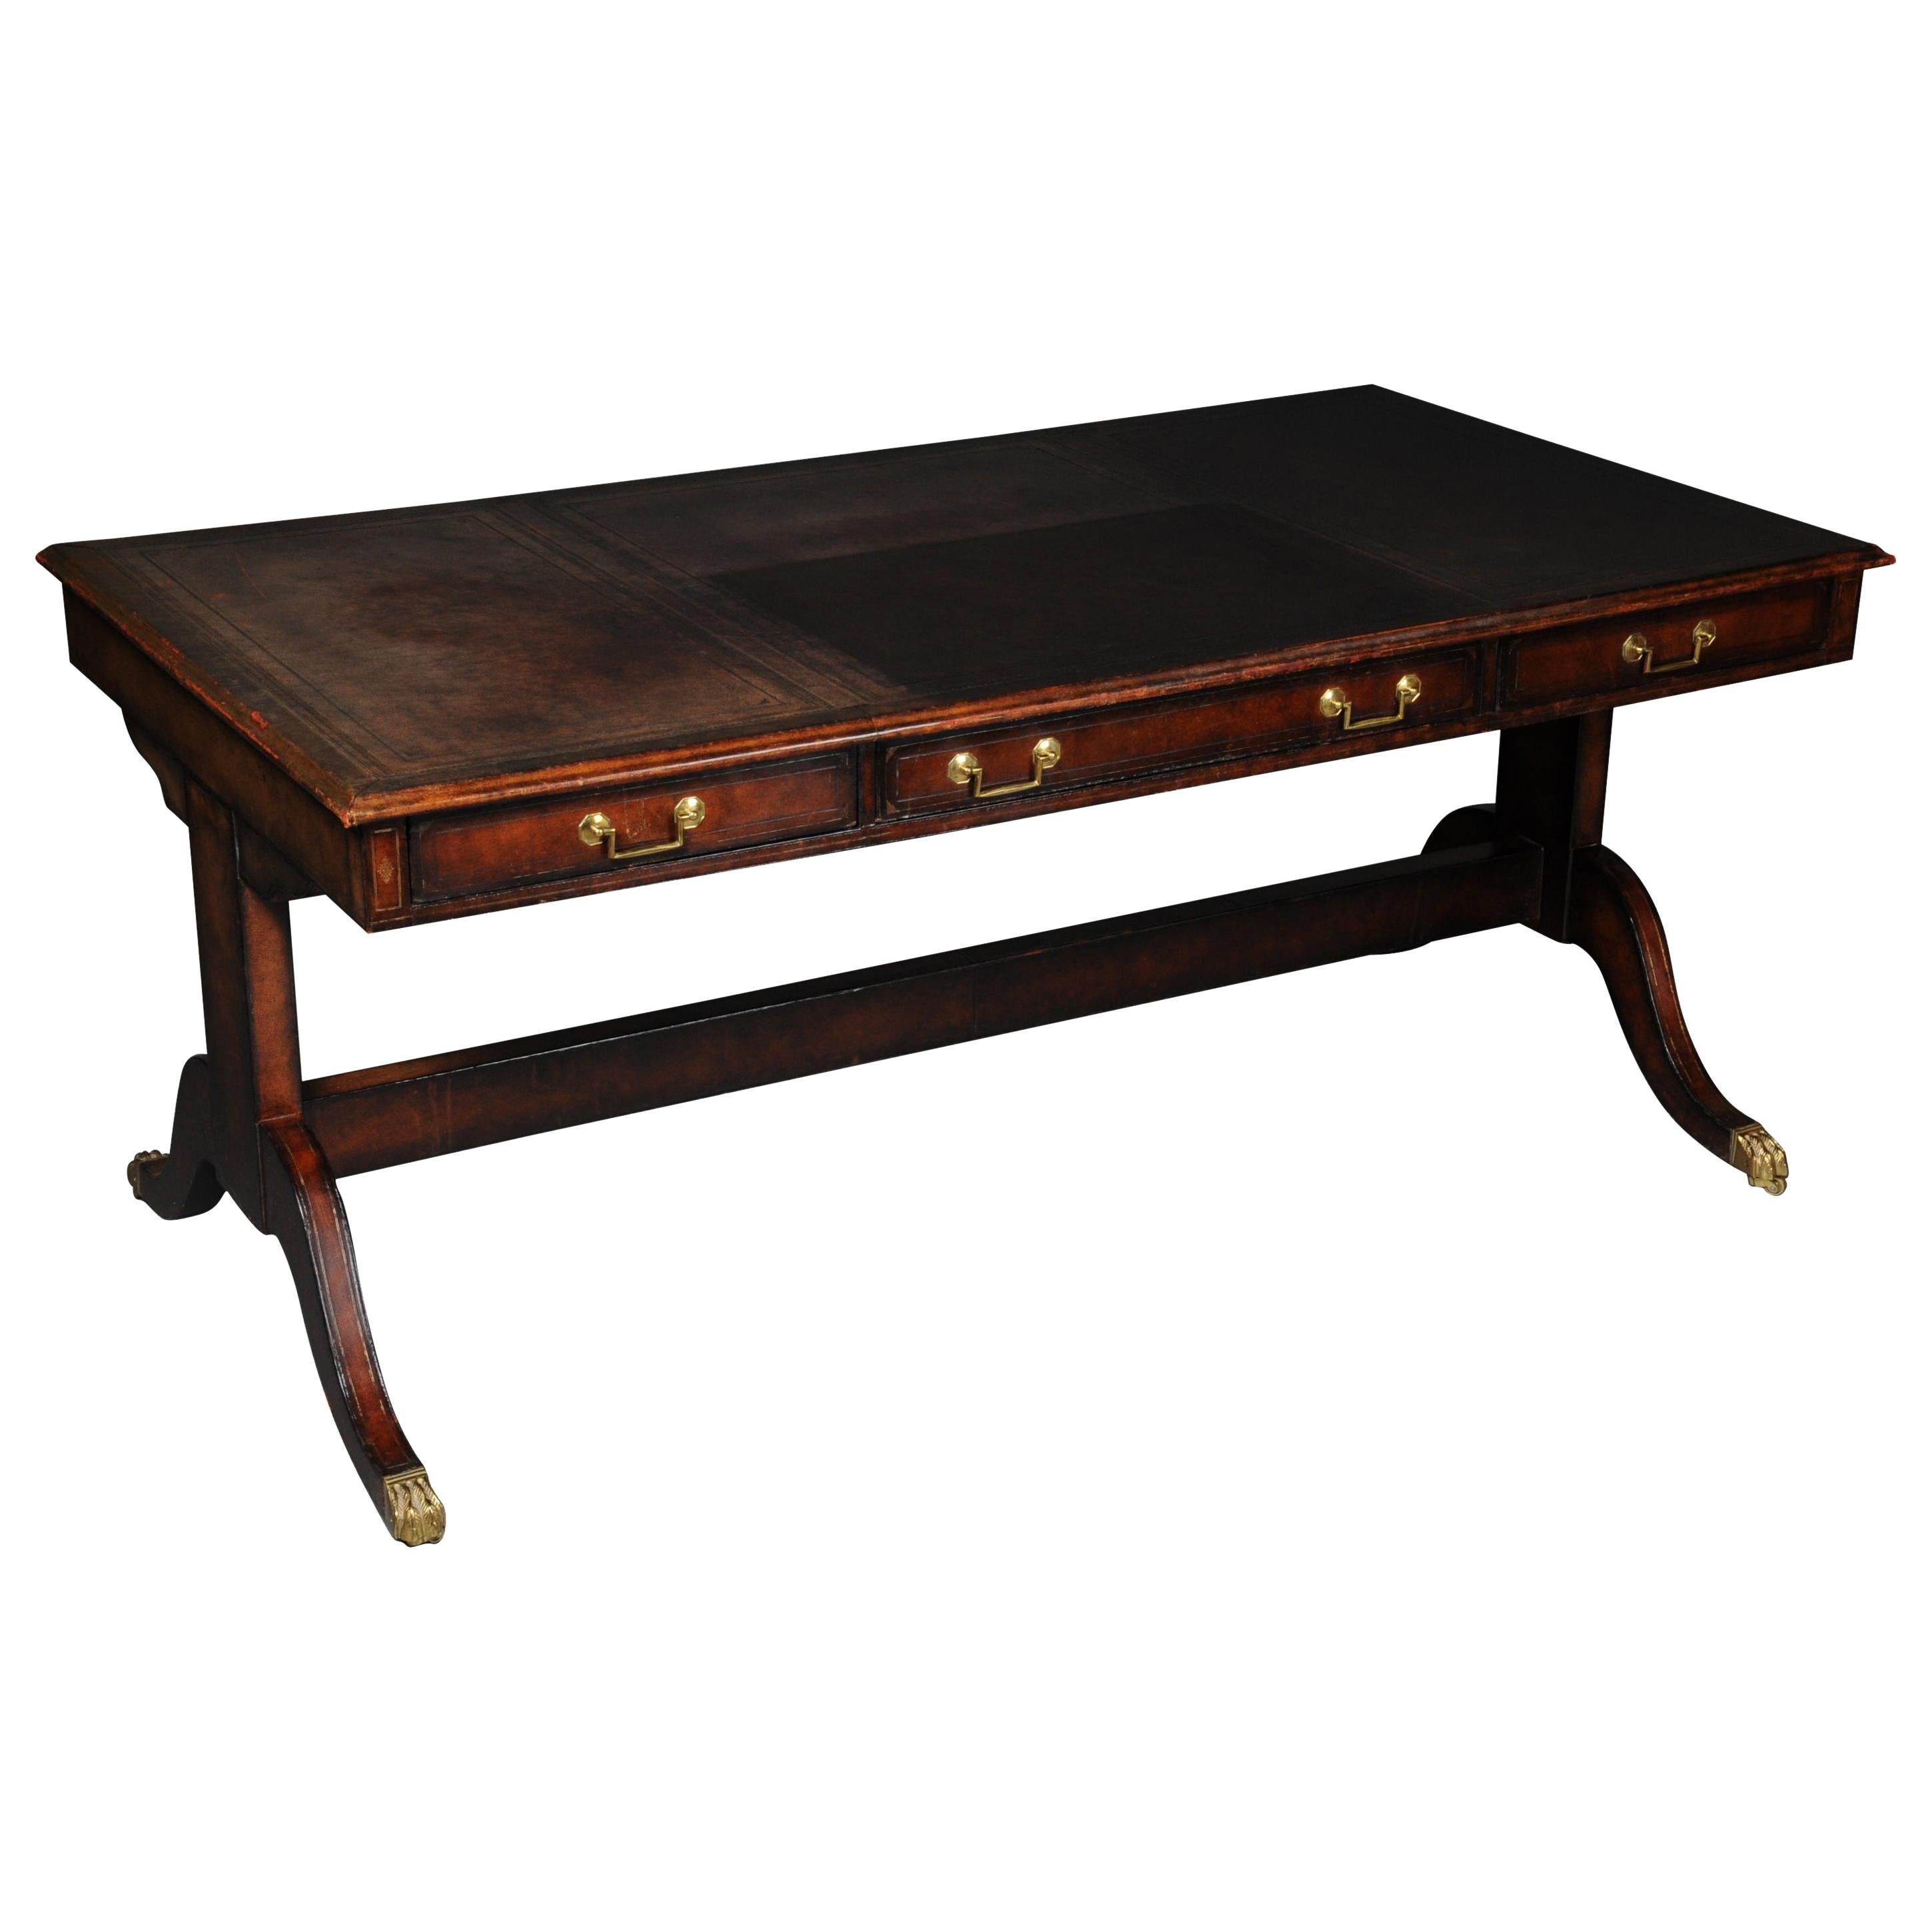 English Partner Desk, 1870 Writing Desk, Mahogany Completely Covered in Leather